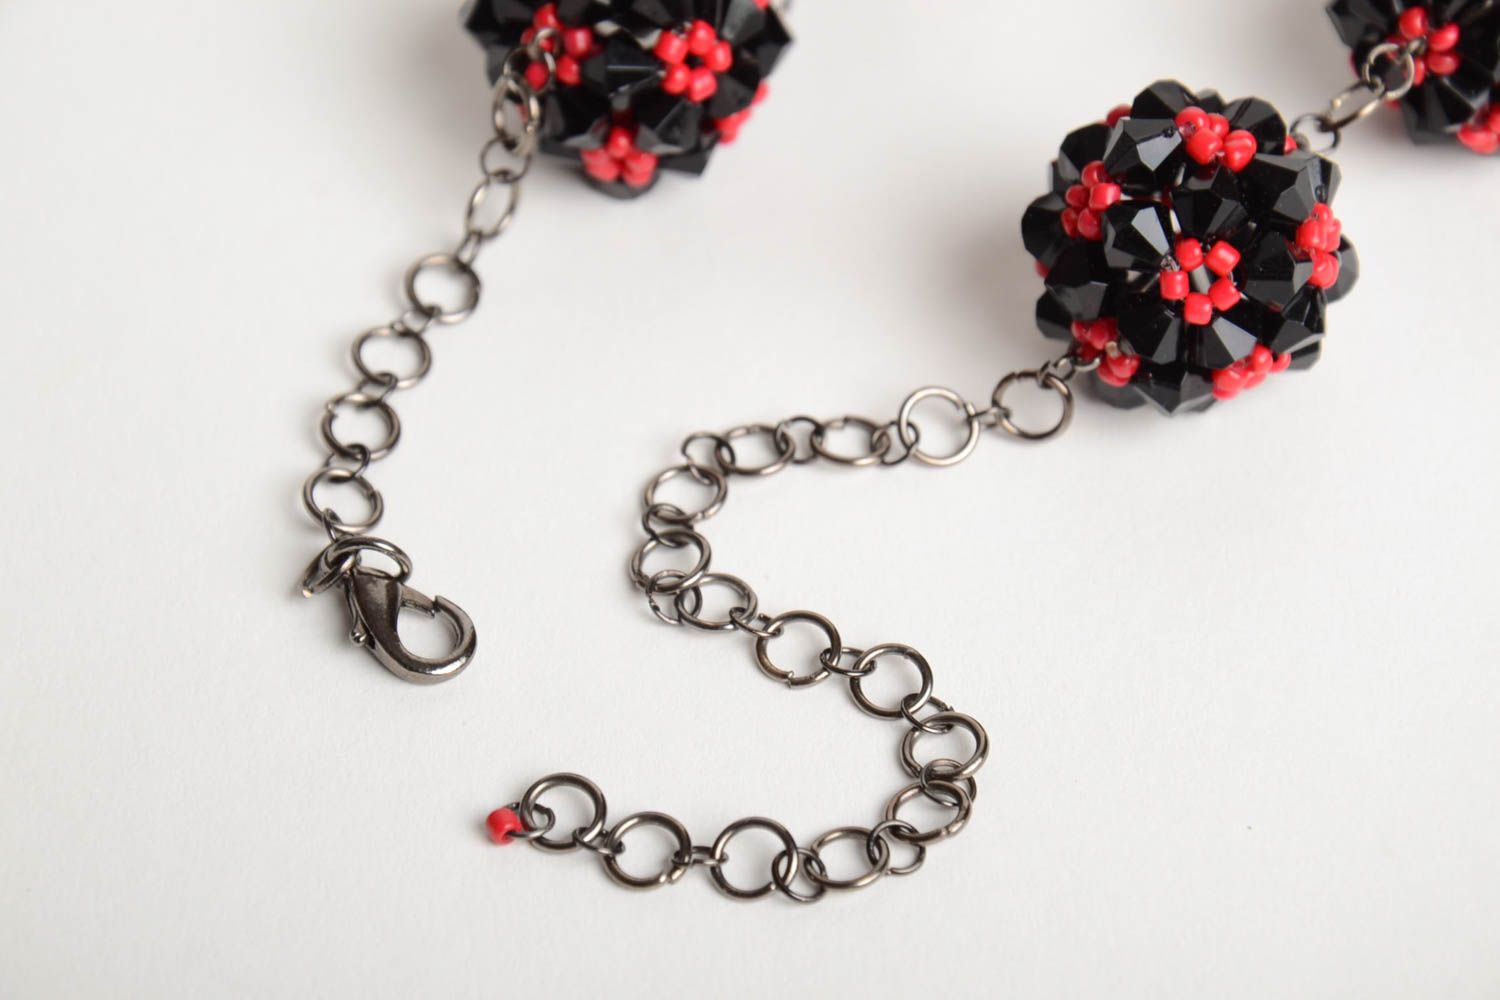 Handmade designer women's necklace crocheted of red and black Czech beads photo 4